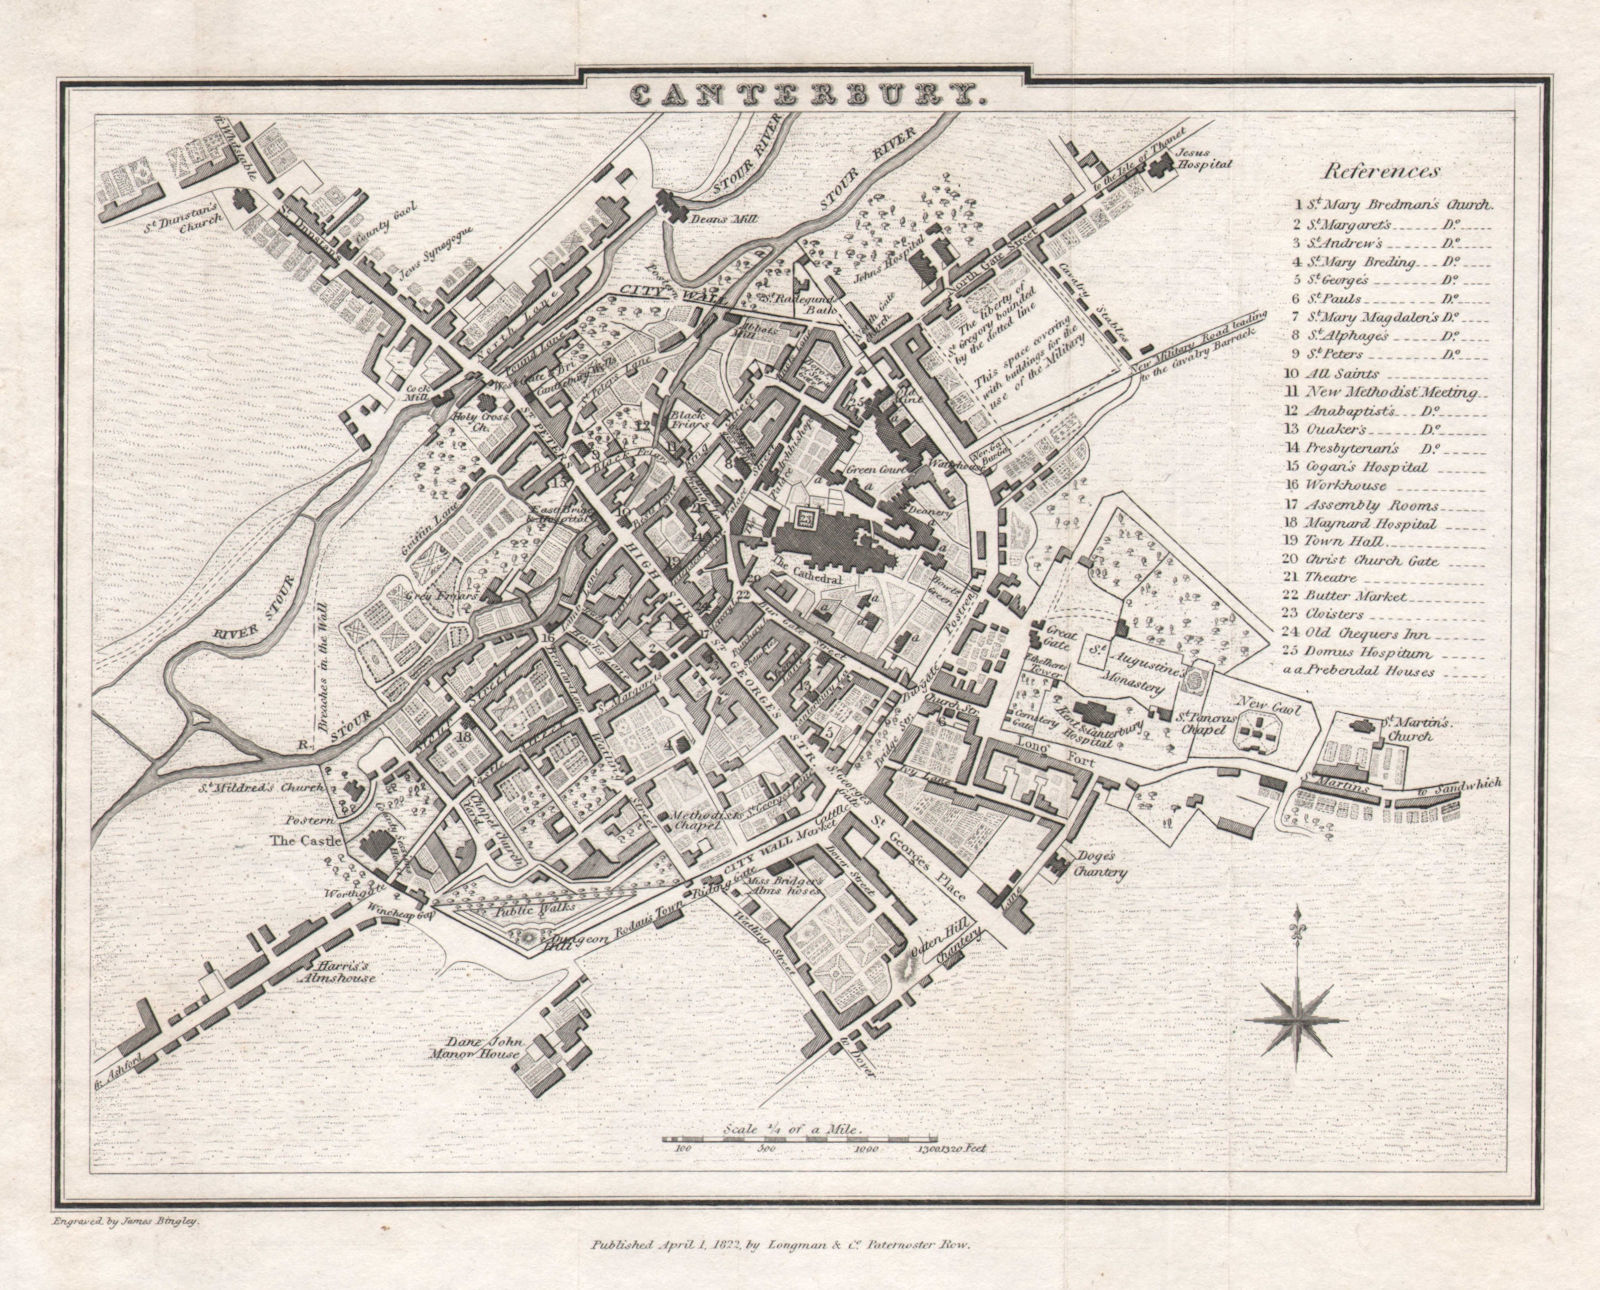 Antique town city plan of CANTERBURY by Jas. BINGLEY after COLE & ROPER 1822 map